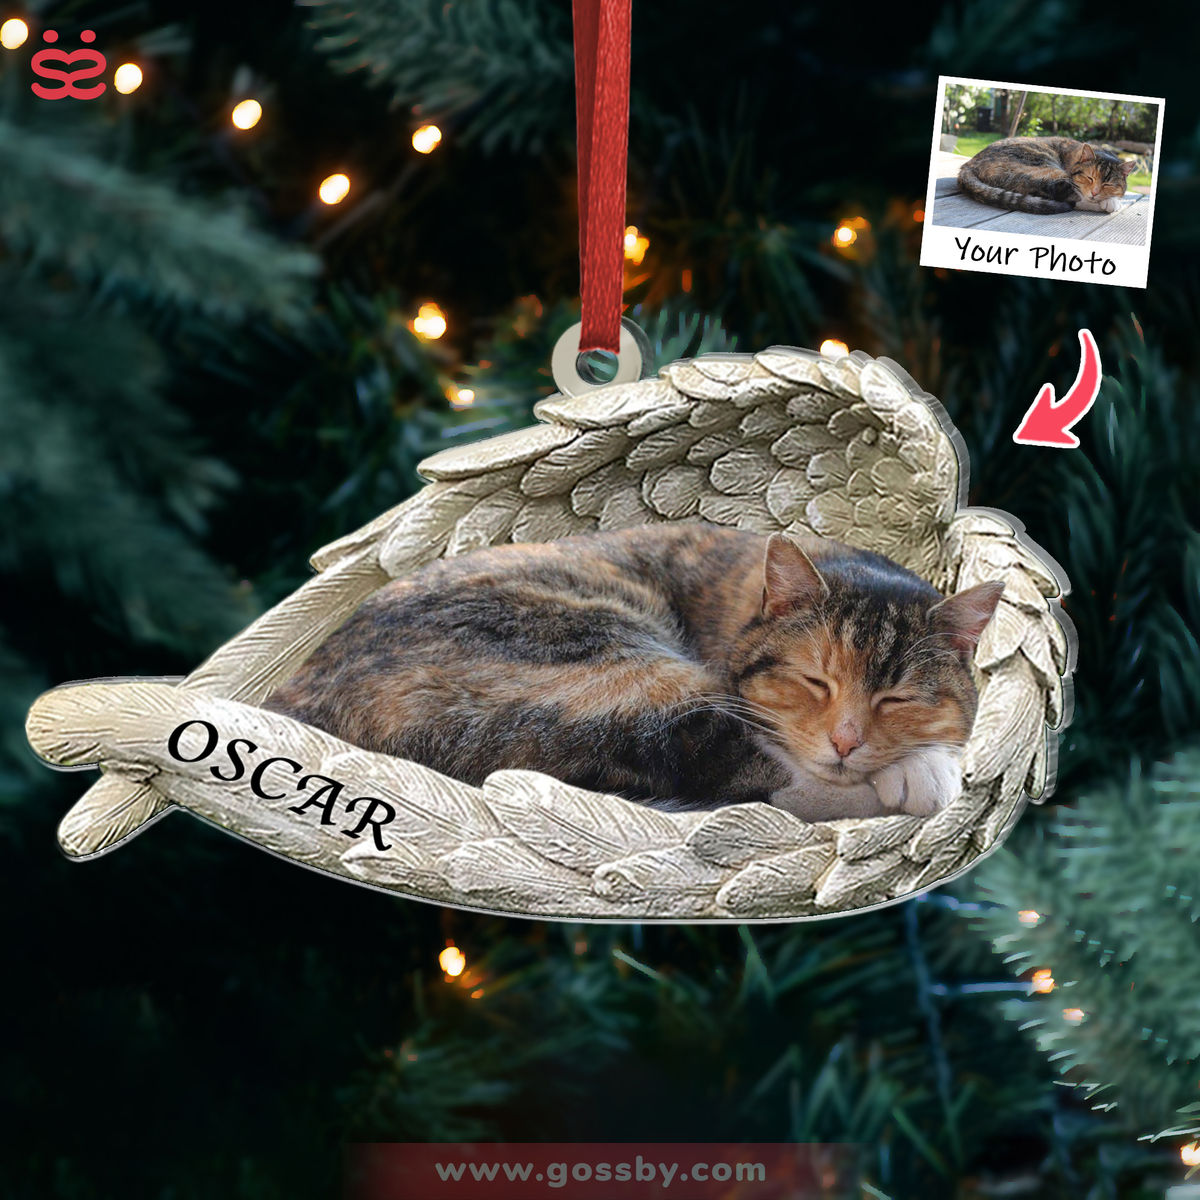 Customized Your Photo Ornament - Sleeping Pet Within Angel Wings - Custom Ornament from Photo, Christmas Gifts